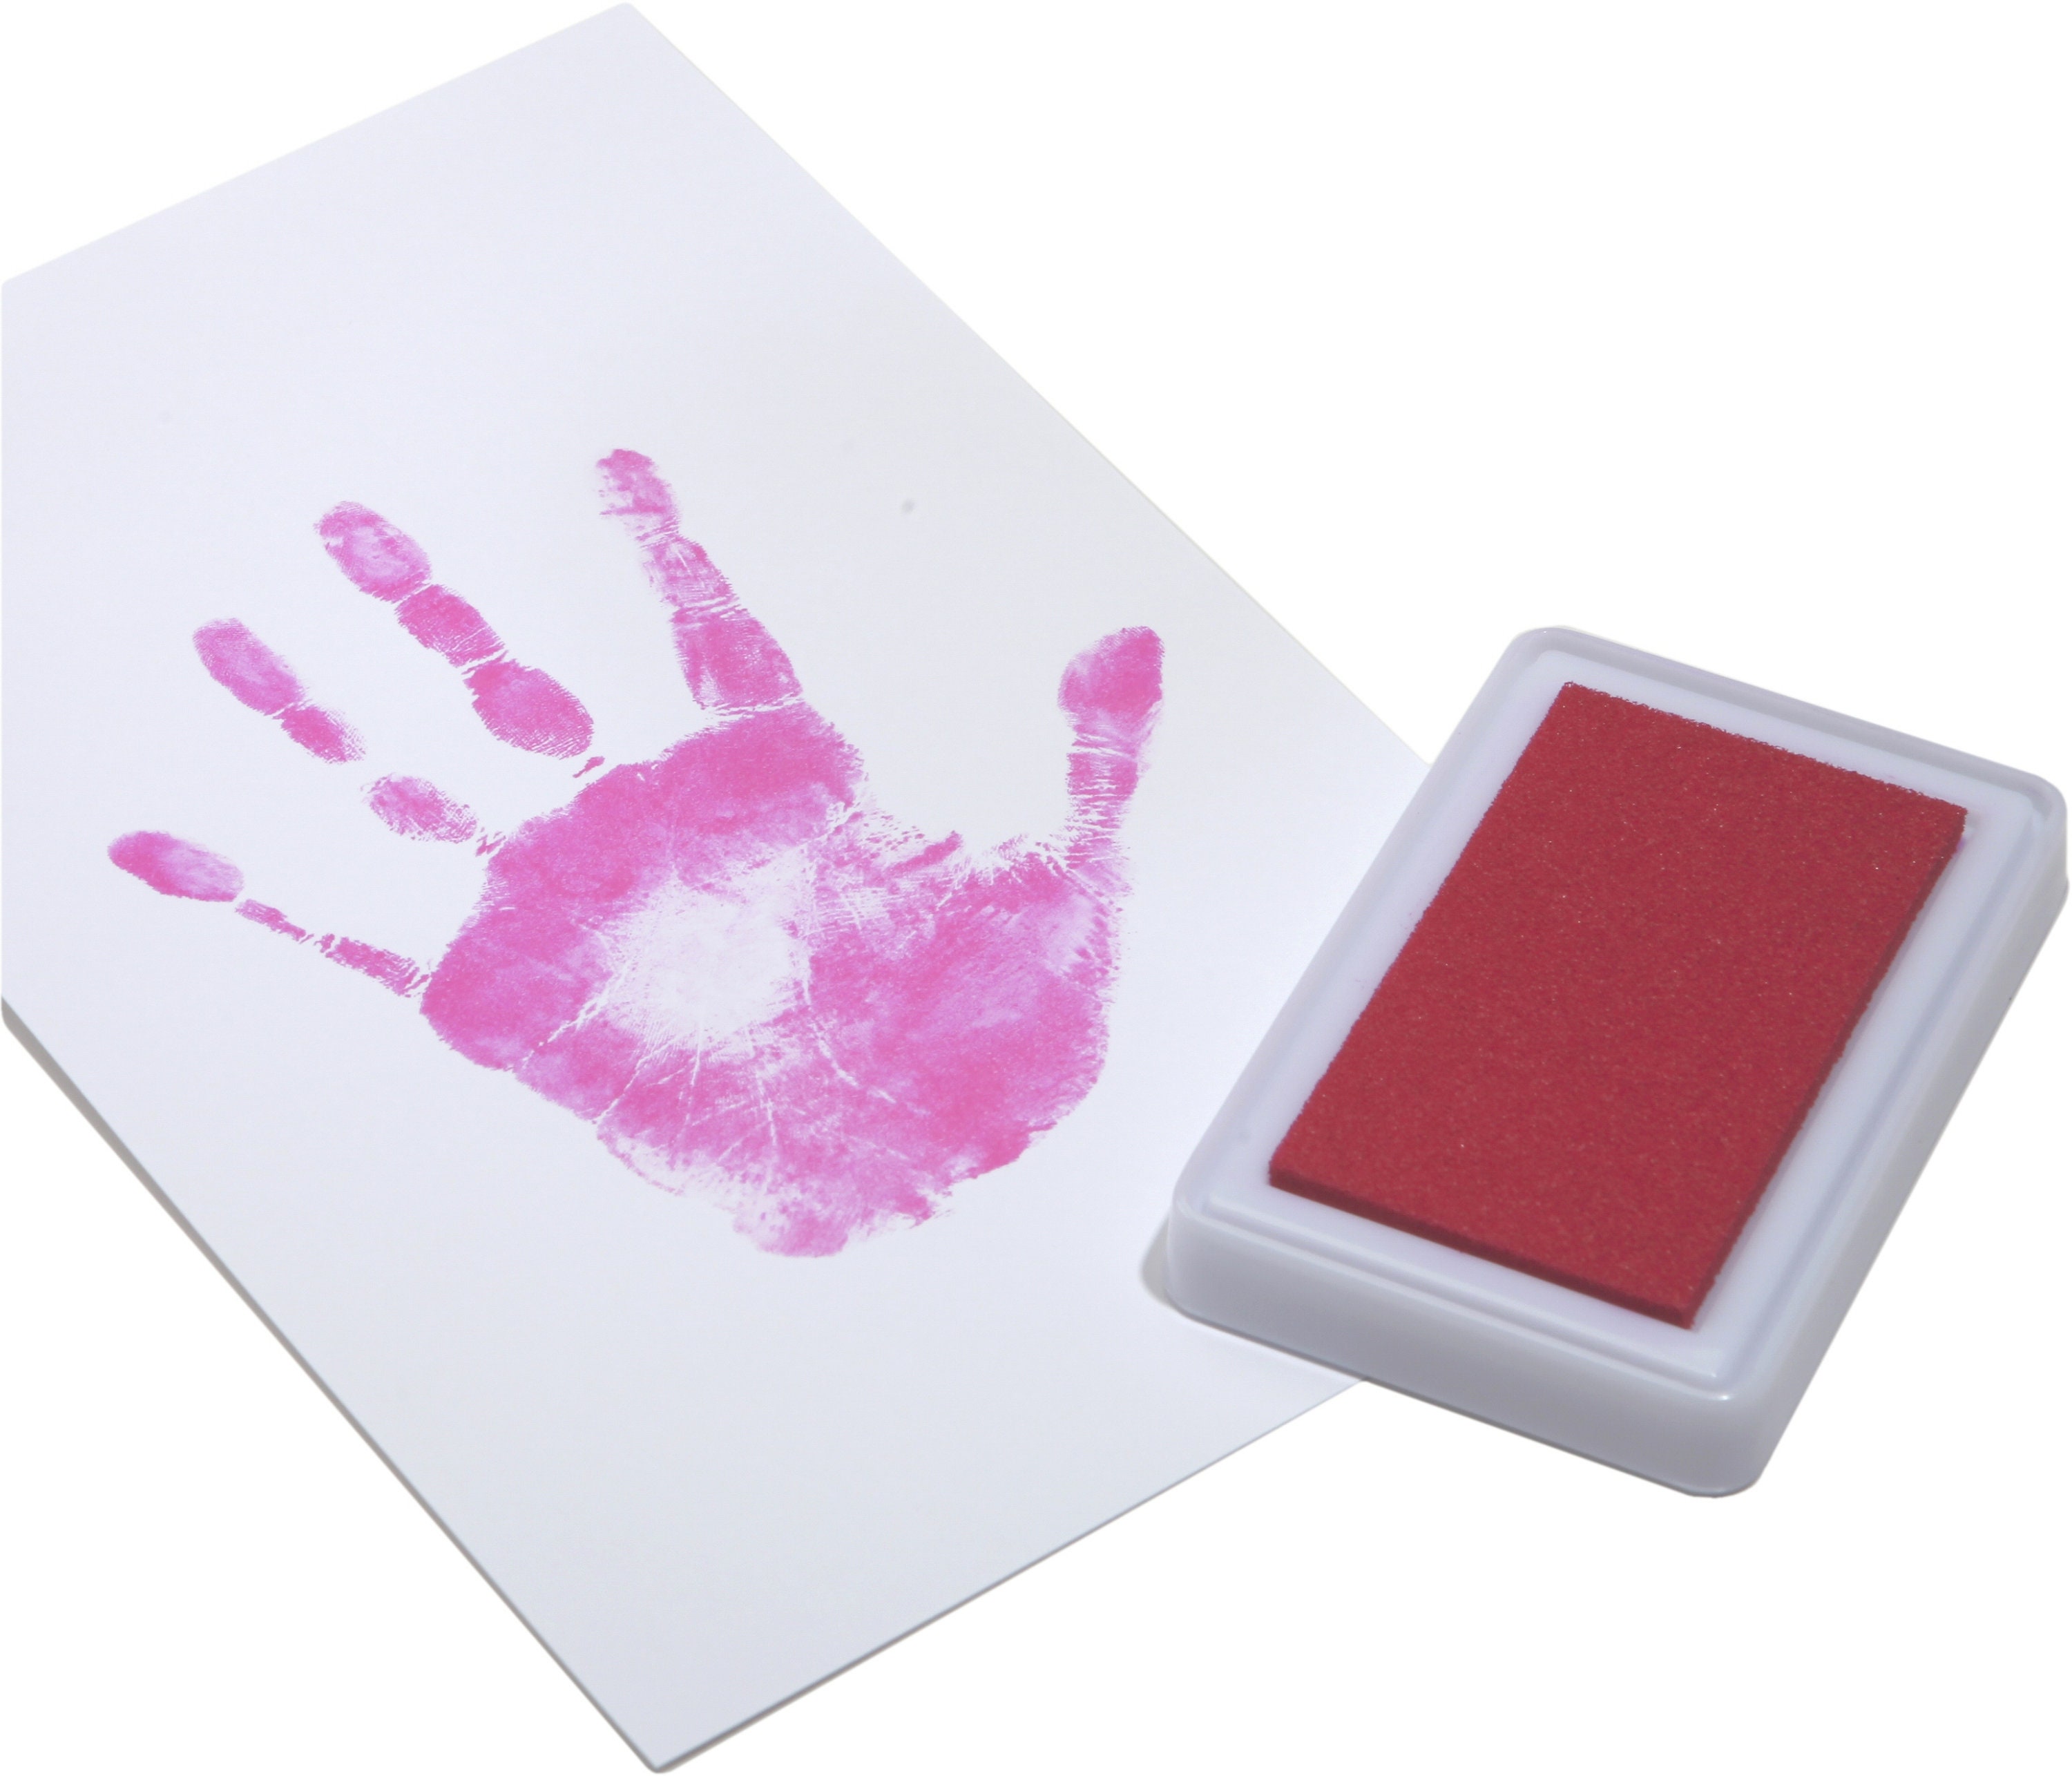 Clean Touch Ink Pad for Baby Handprints and Footprints Inkless Infant Hand & Foot Stamp Safe for Babies, Doesnt Touch Skin Perfect Family Memory O